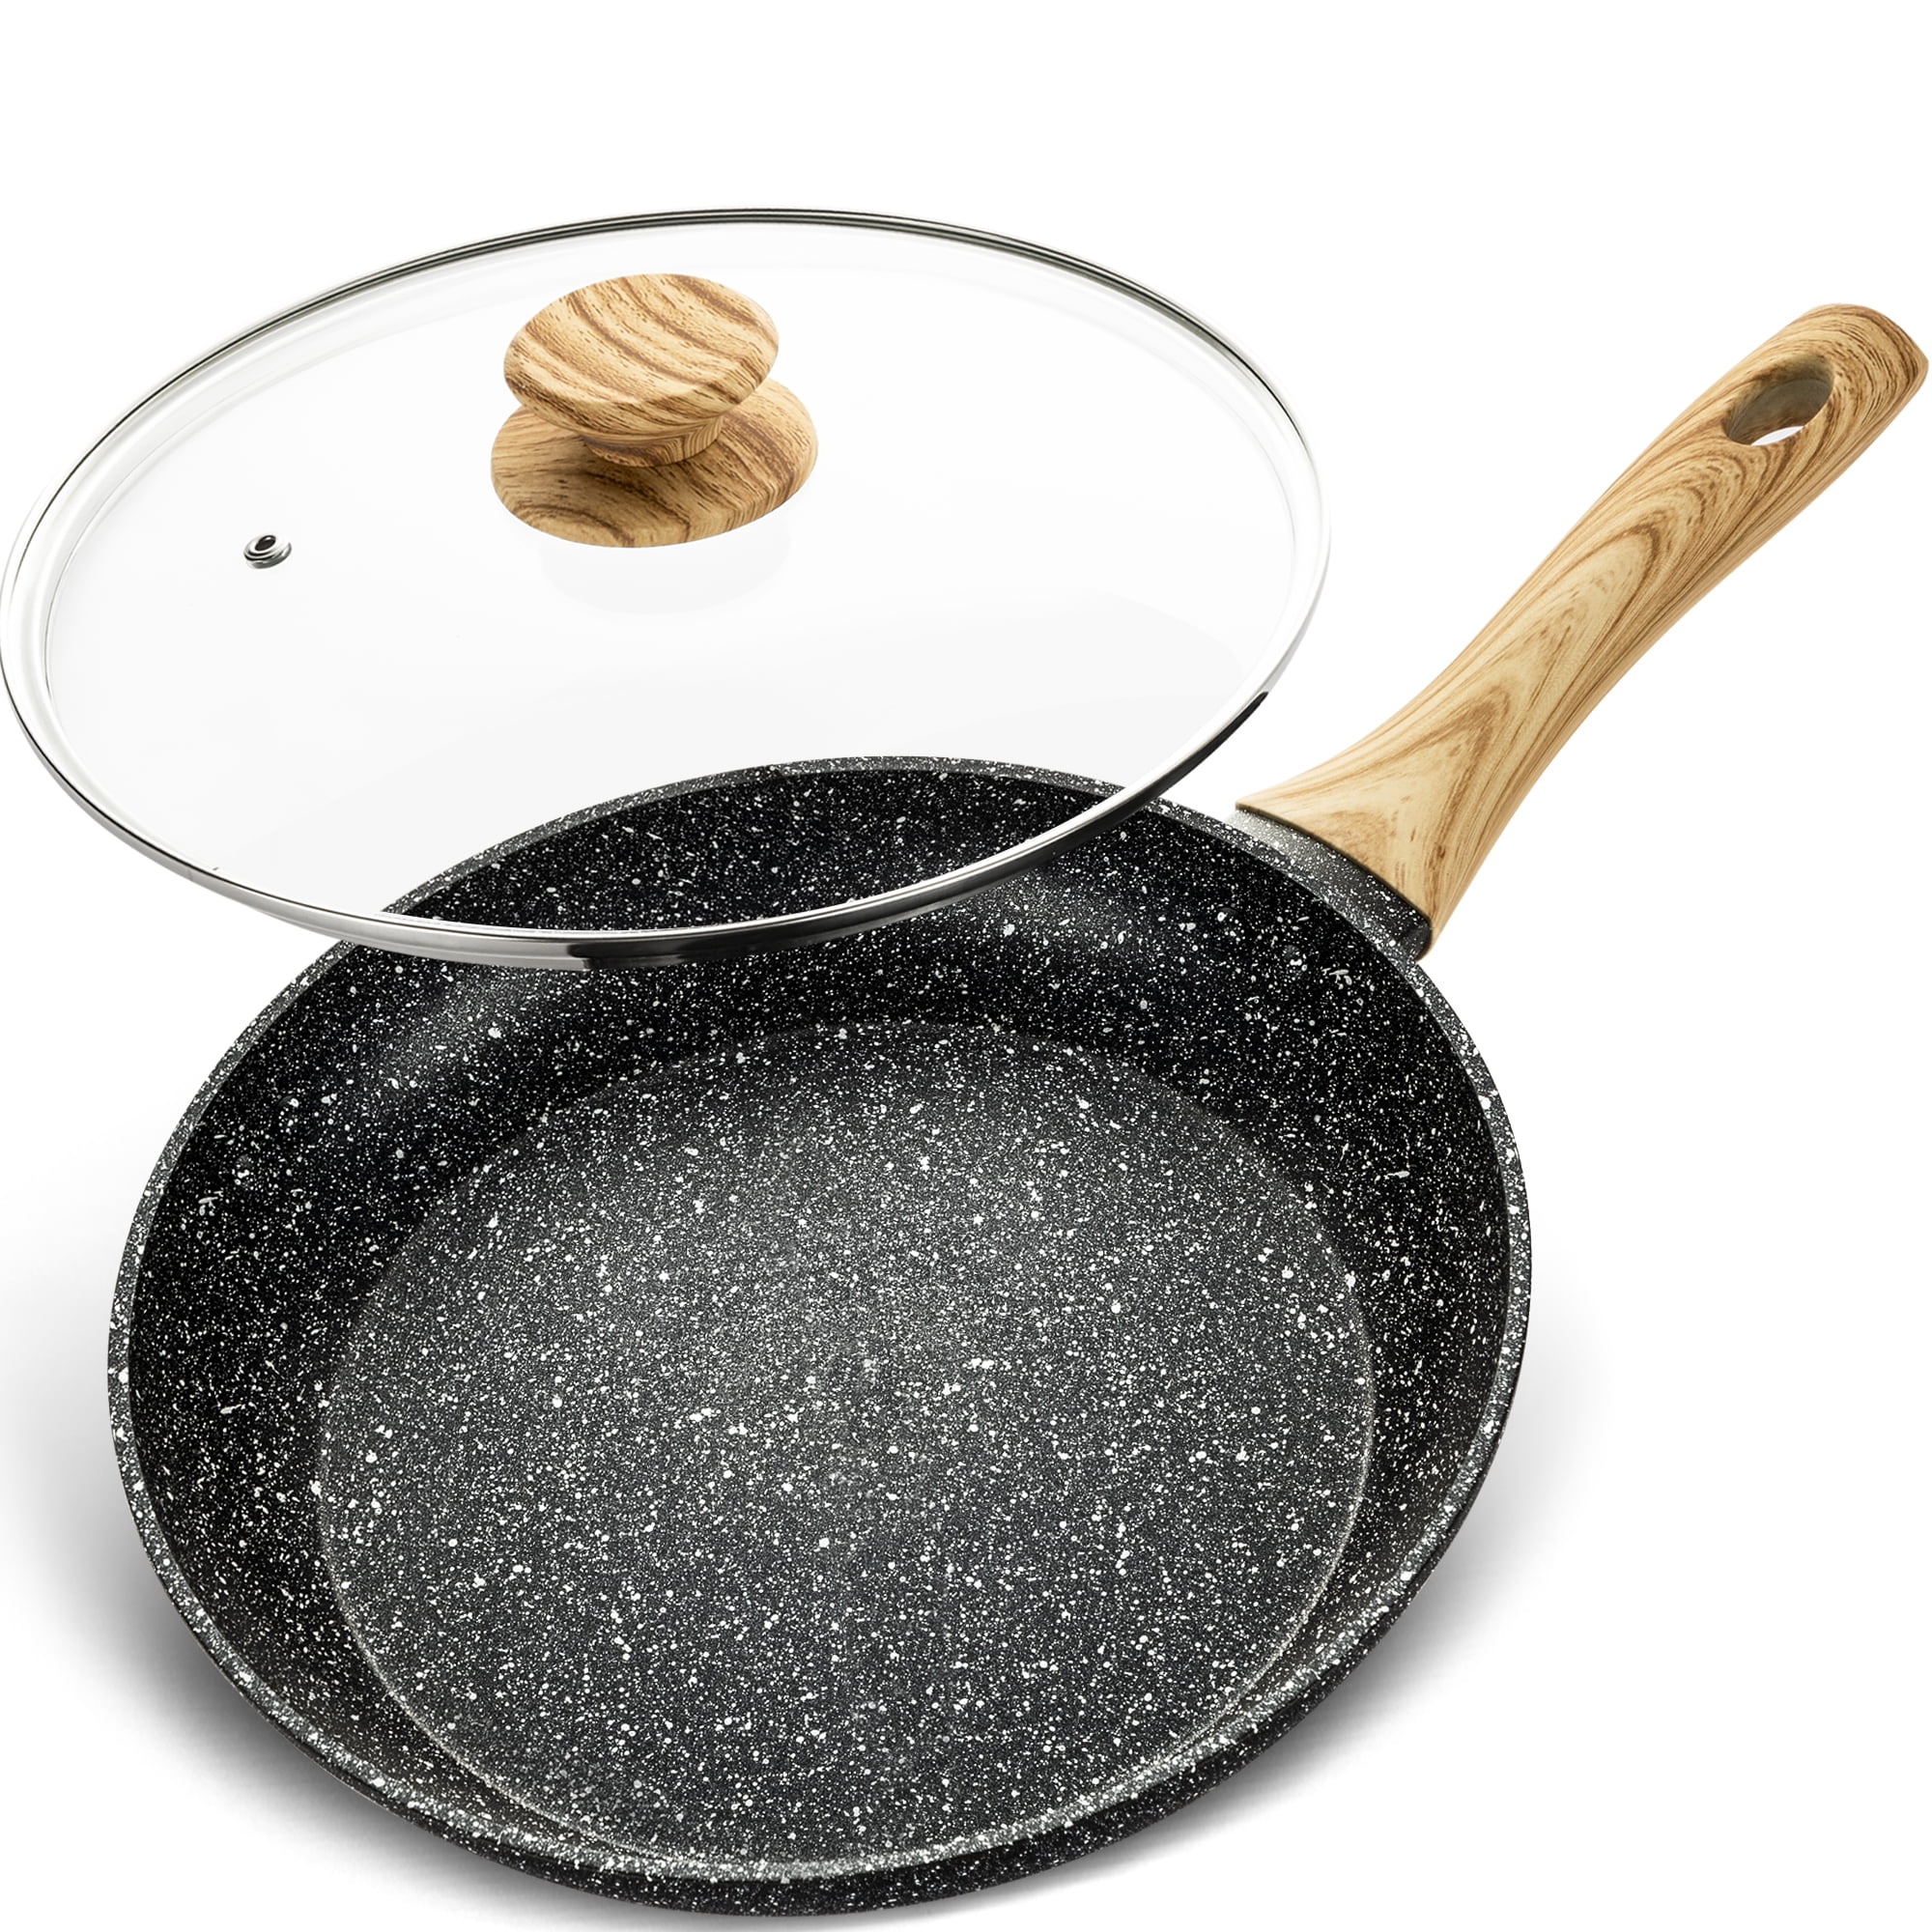 10 Inch Nonstick Frying Pan with Glass Lid – almondhome